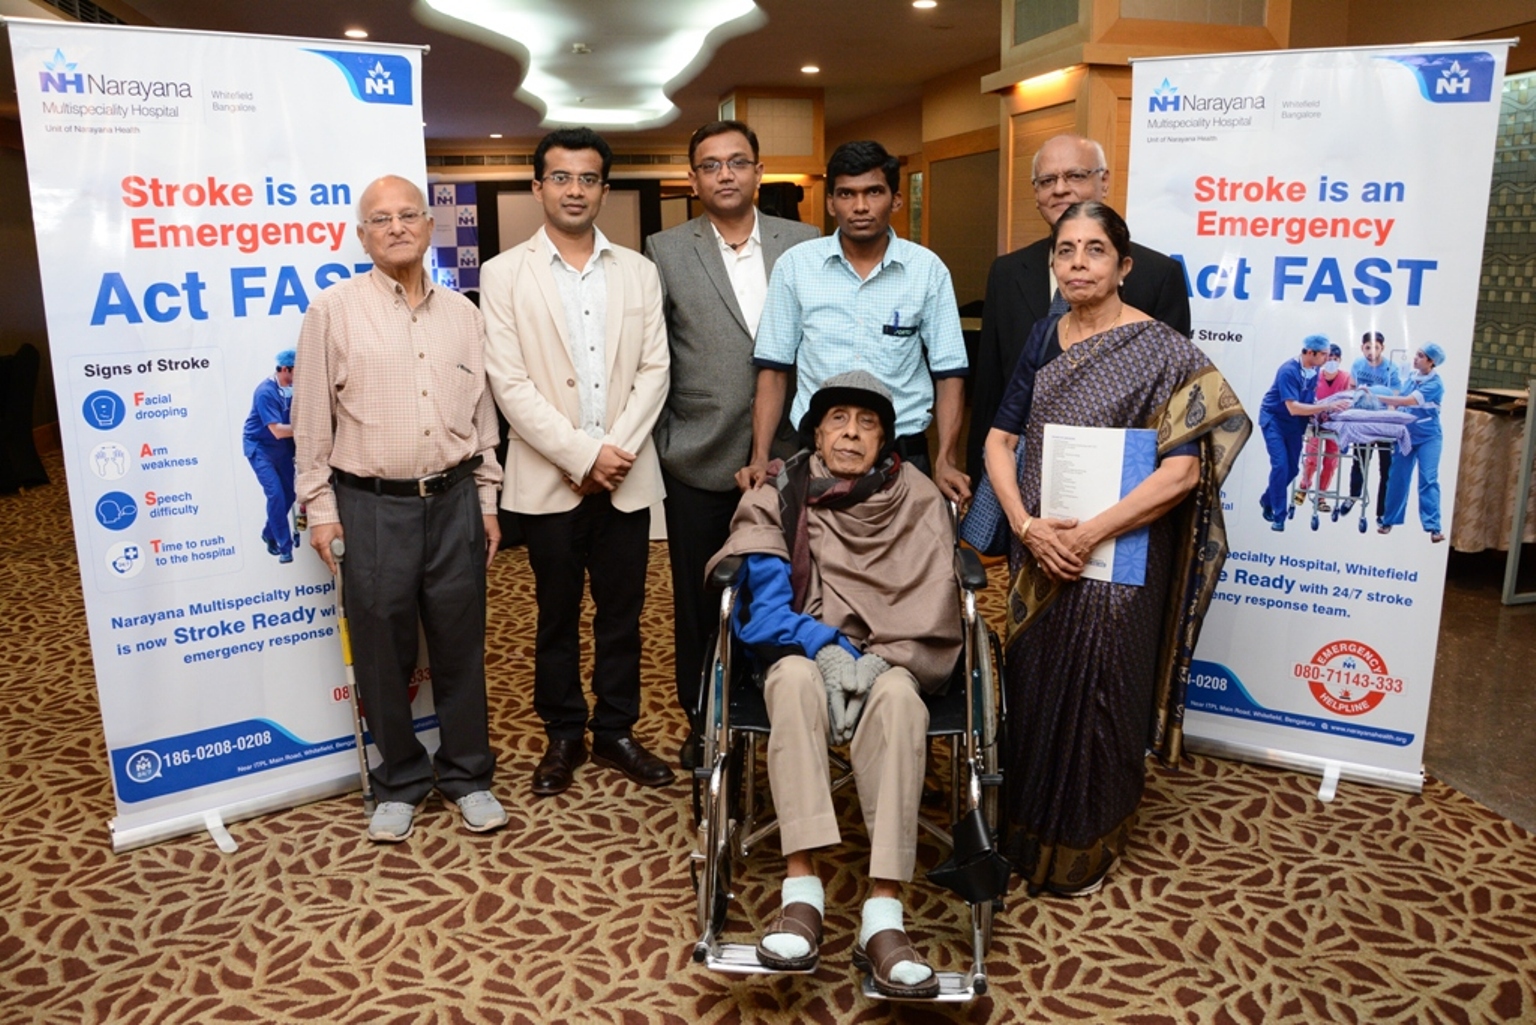 Narayana doctors save 102 year old patient from lifelong paralysis by thrombolysis